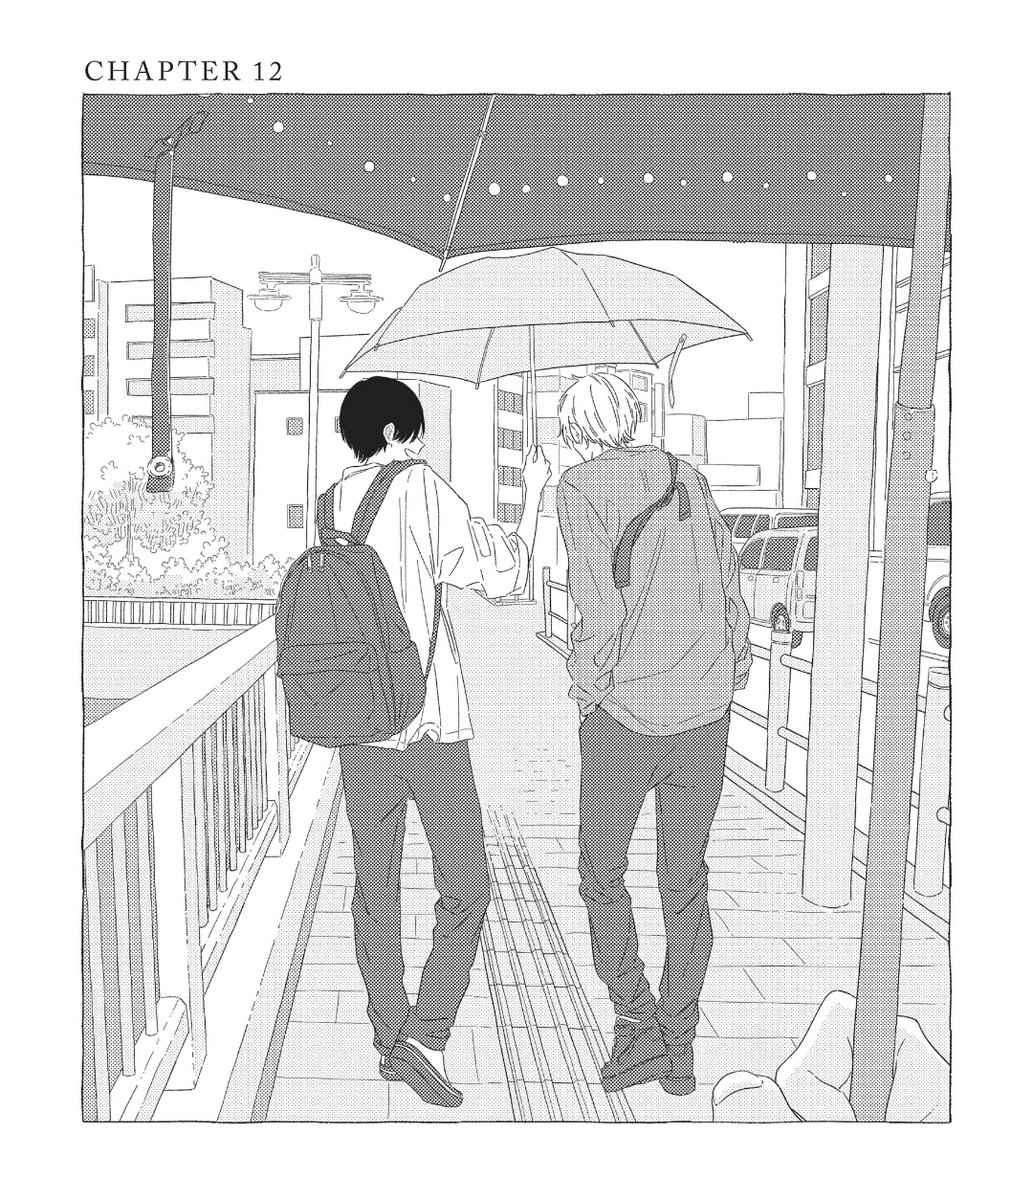 The way seeing an umbrella panel instantly makes me smile. #amreading ☂️